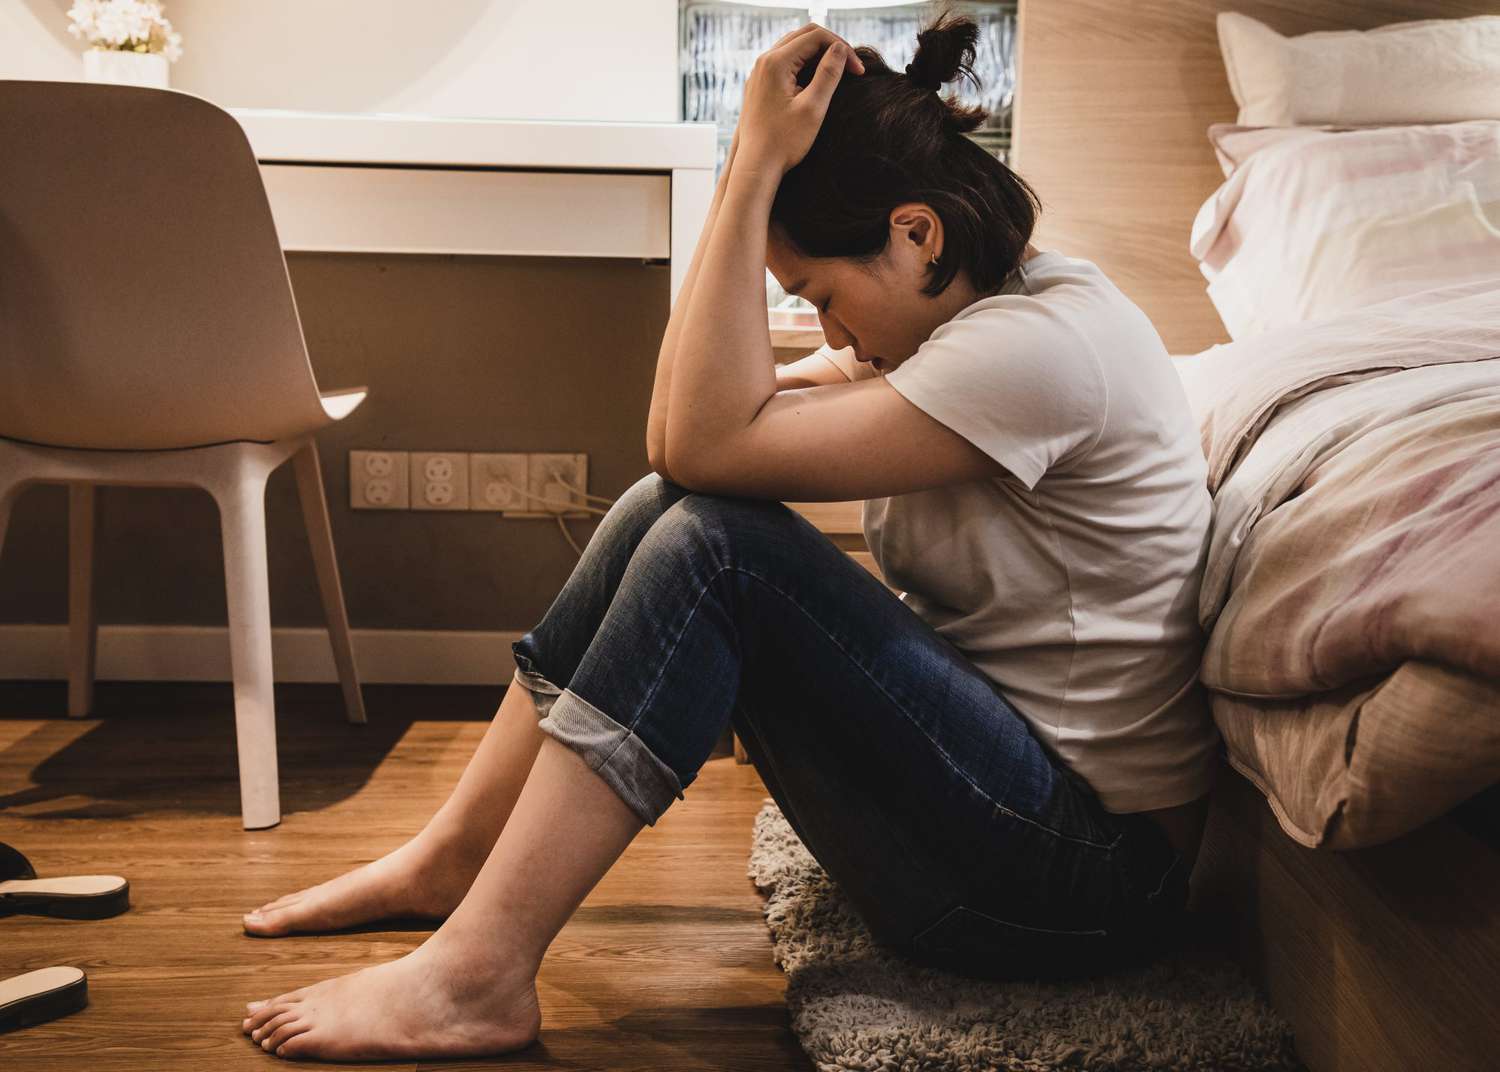 Asian woman sitting on floor next to bed feeling depressed